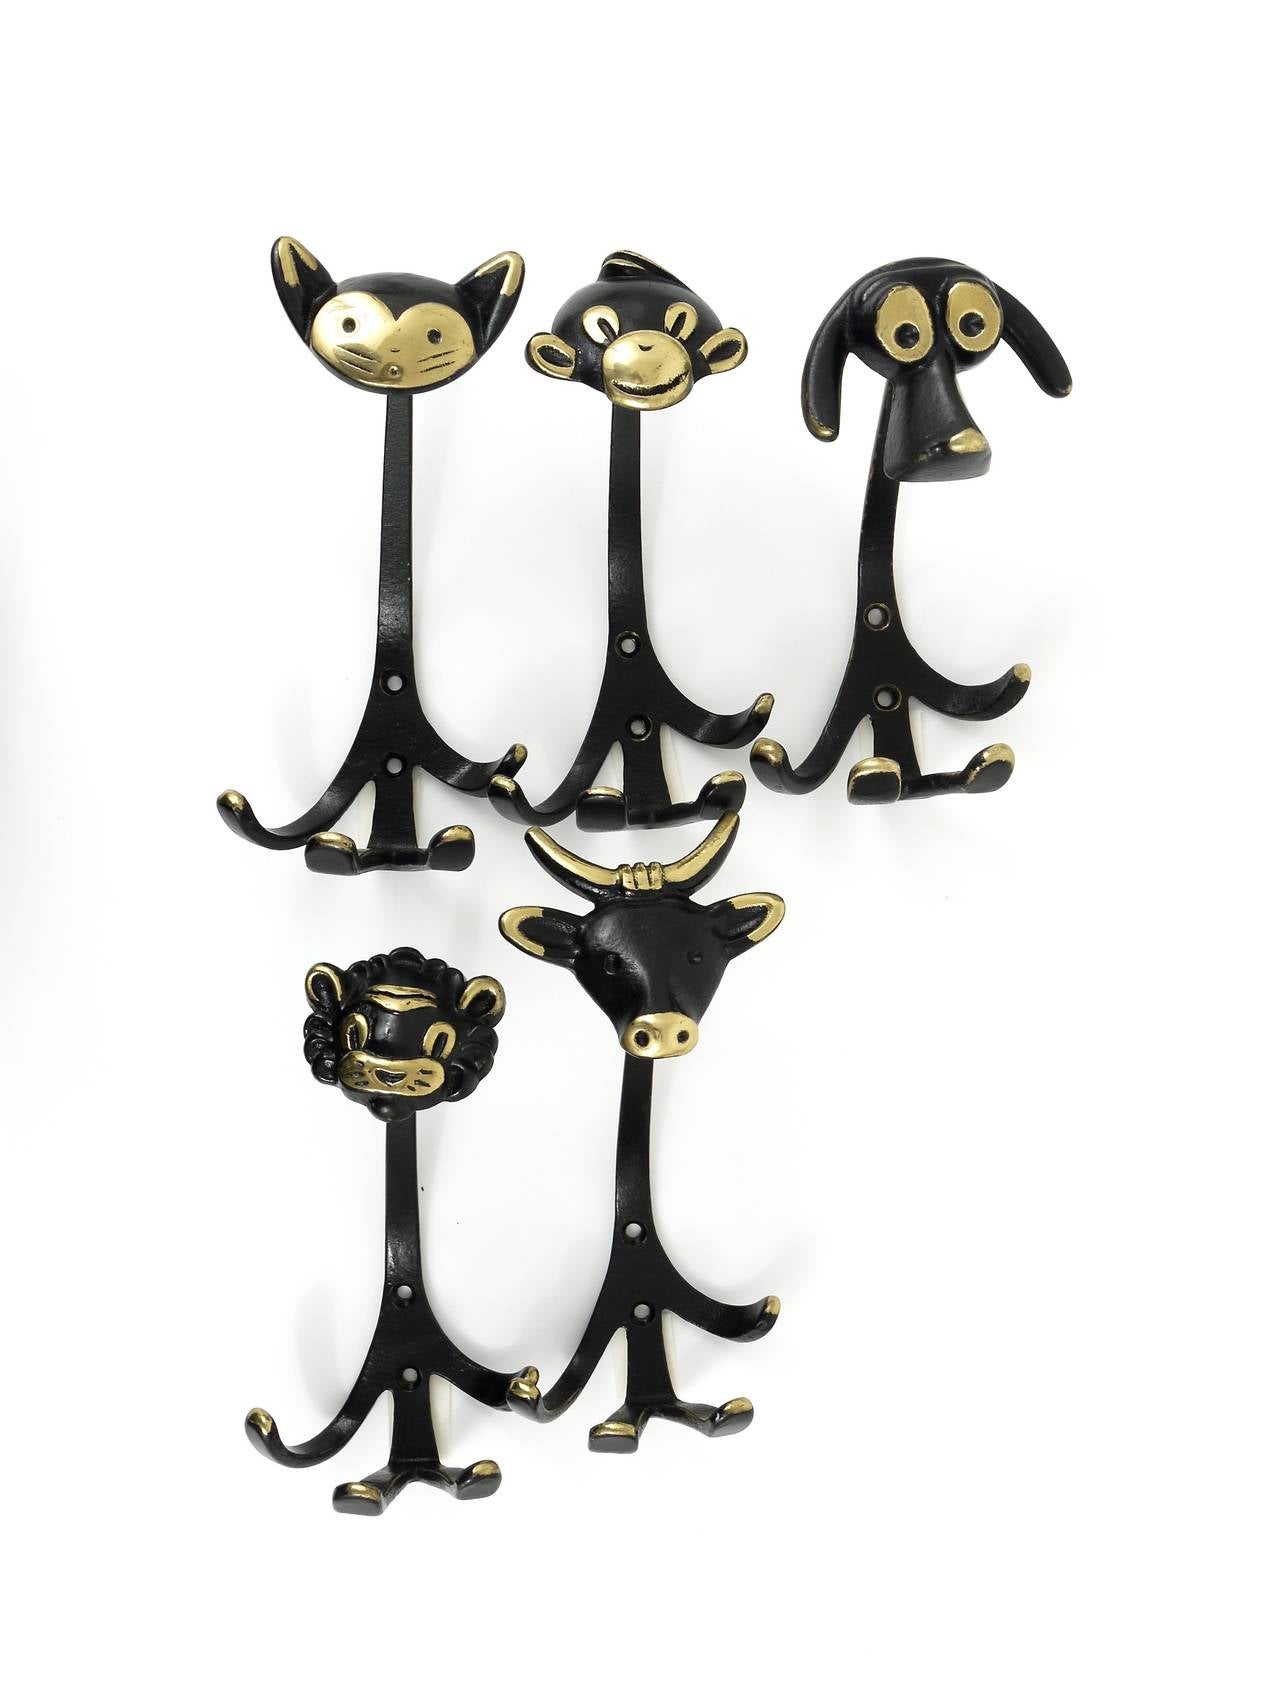 A set of five Austrian modernist brass wall coat hooks, displaying a dog, a cow, a lion, a cat and a monkey. A very humorous design by Walter Bosse, executed by Hertha Baller Austria in the 1950s. Made of black finished brass. In very good condition